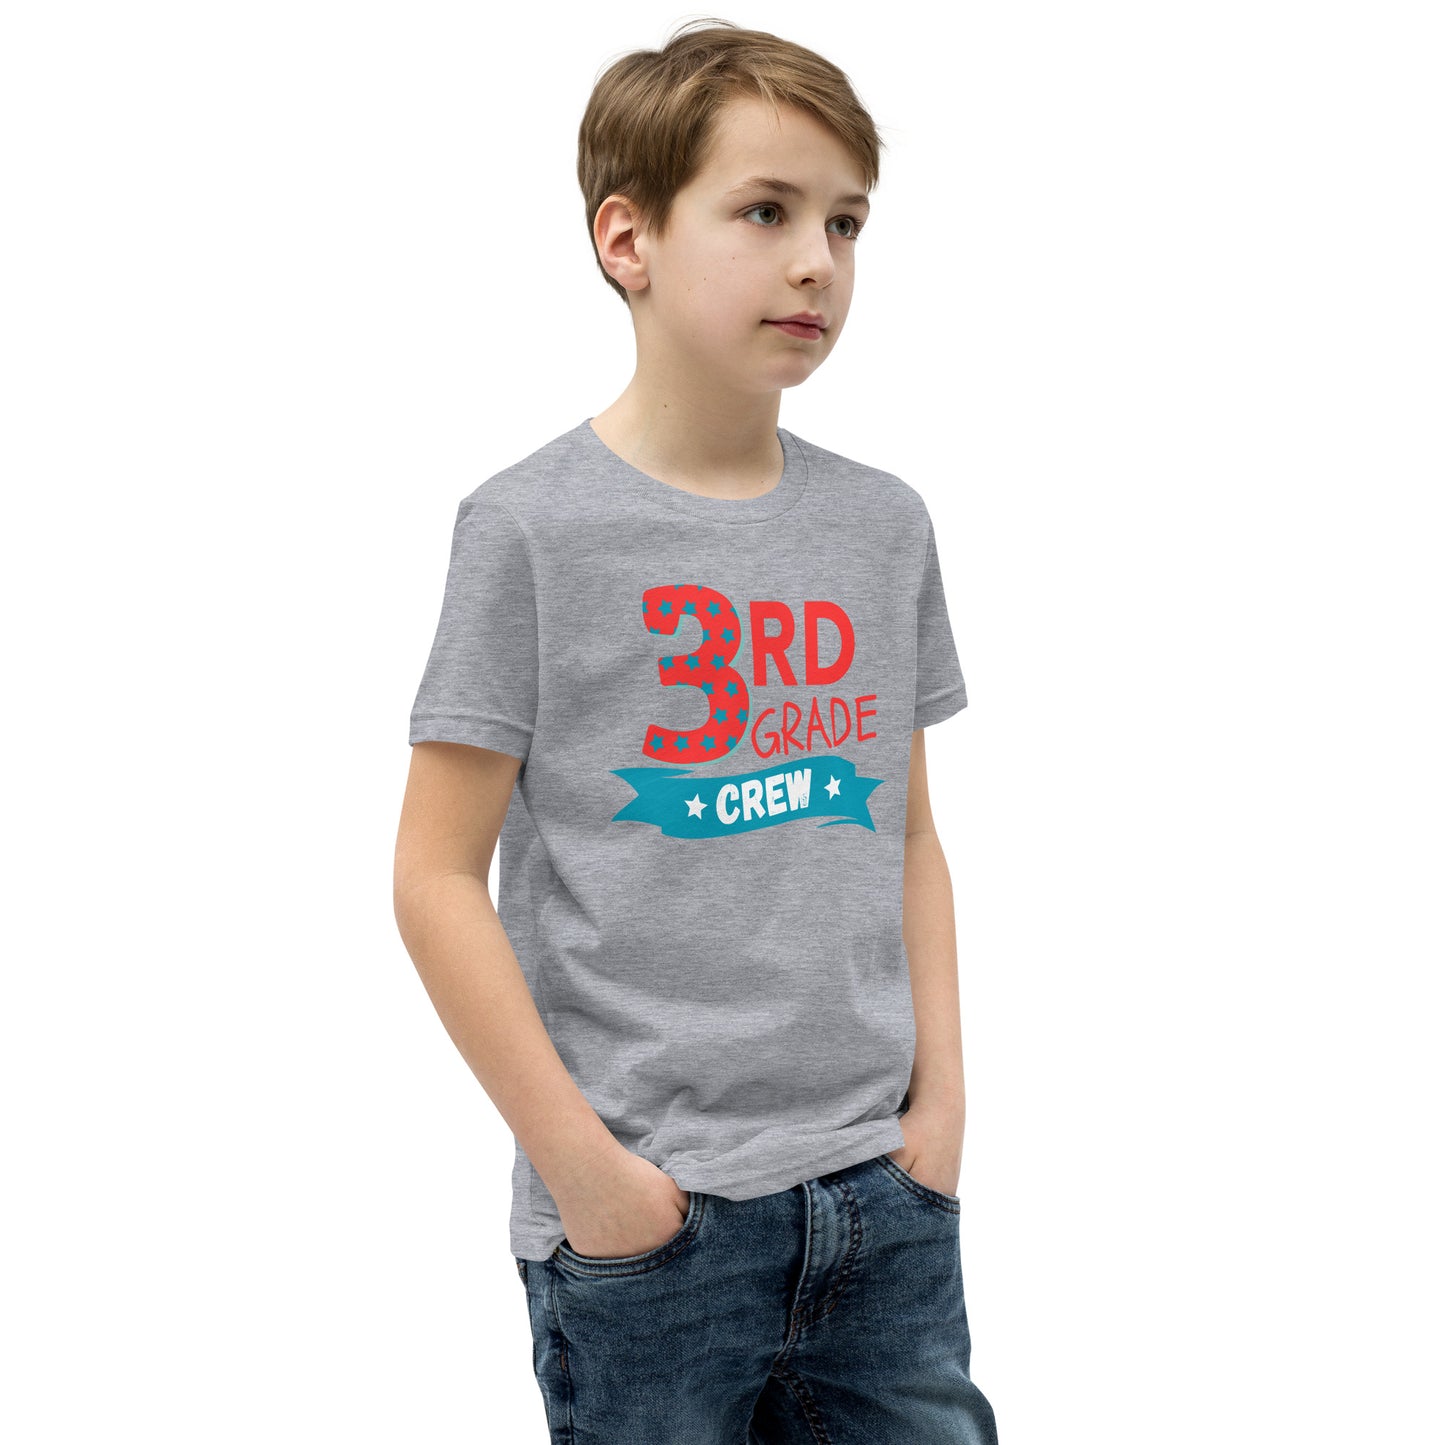 3rd grade crew Youth Back to school T-shirt